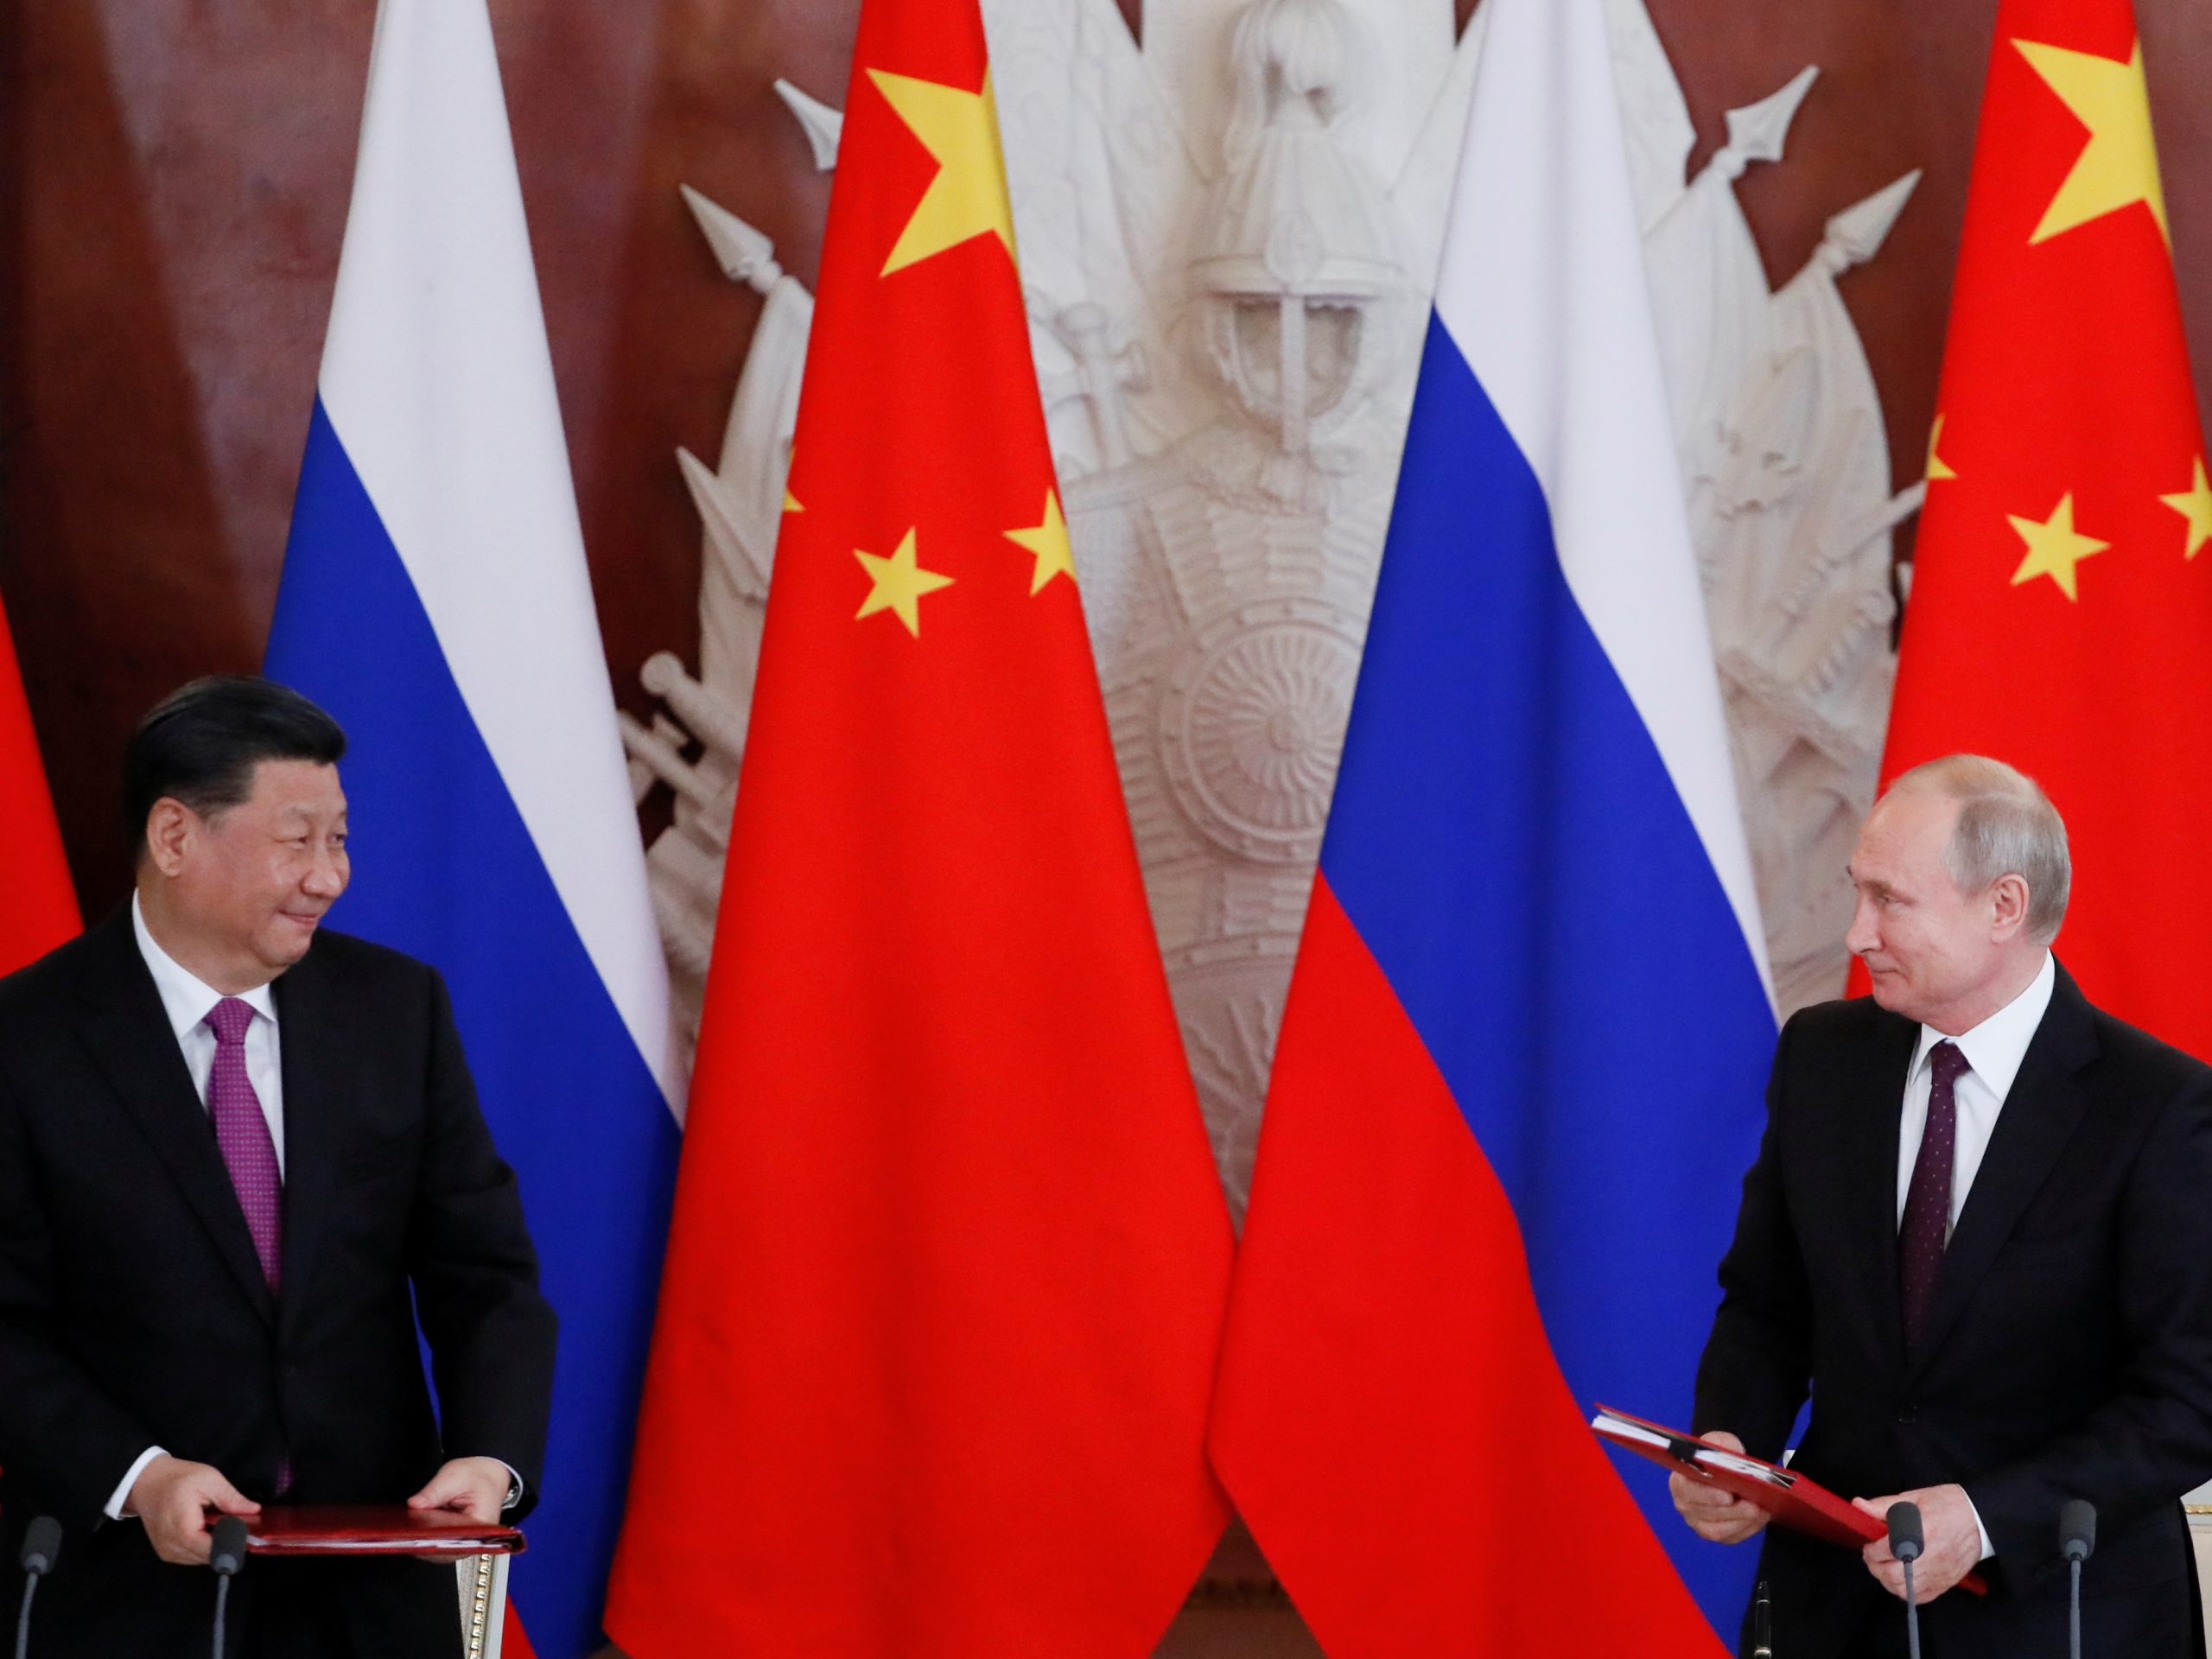 China, Ukraine, and Israel in the cyberwar spotlight as tensions